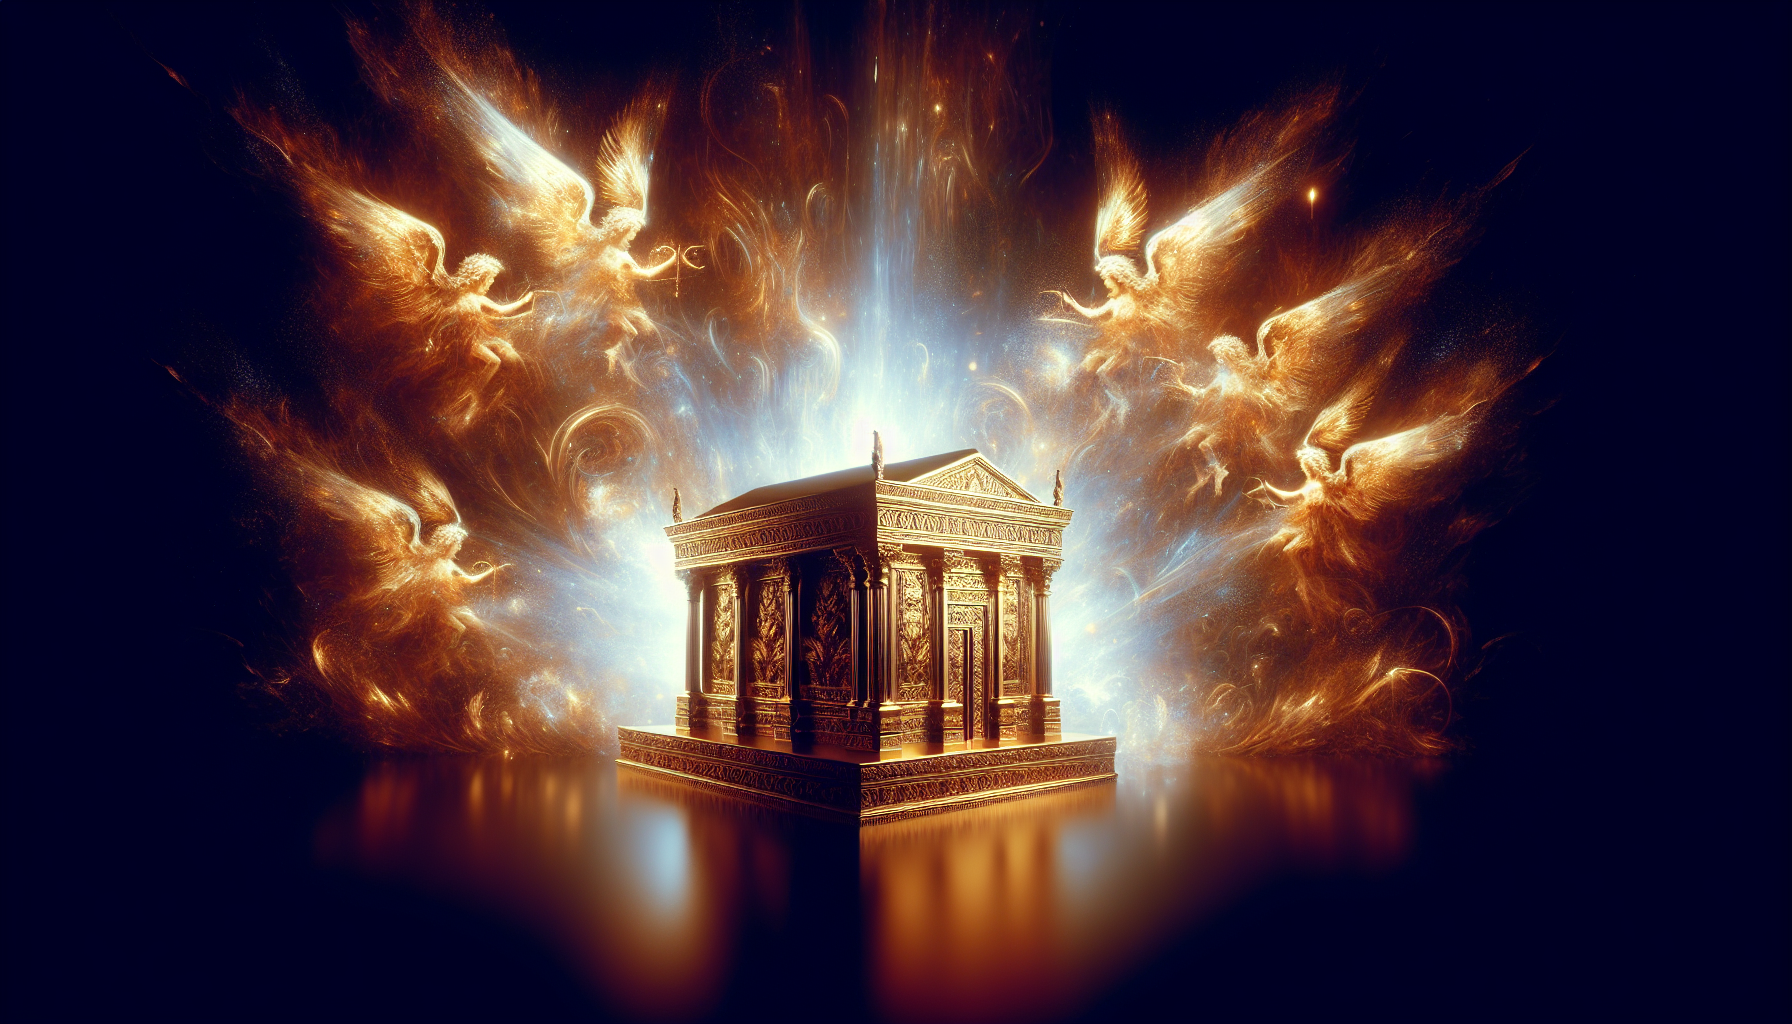 An artistic interpretation of the Ark of the Covenant as described in the Bible, located inside the dimly lit, richly decorated Holy of Holies, with golden cherubim and mystical light emanating from t